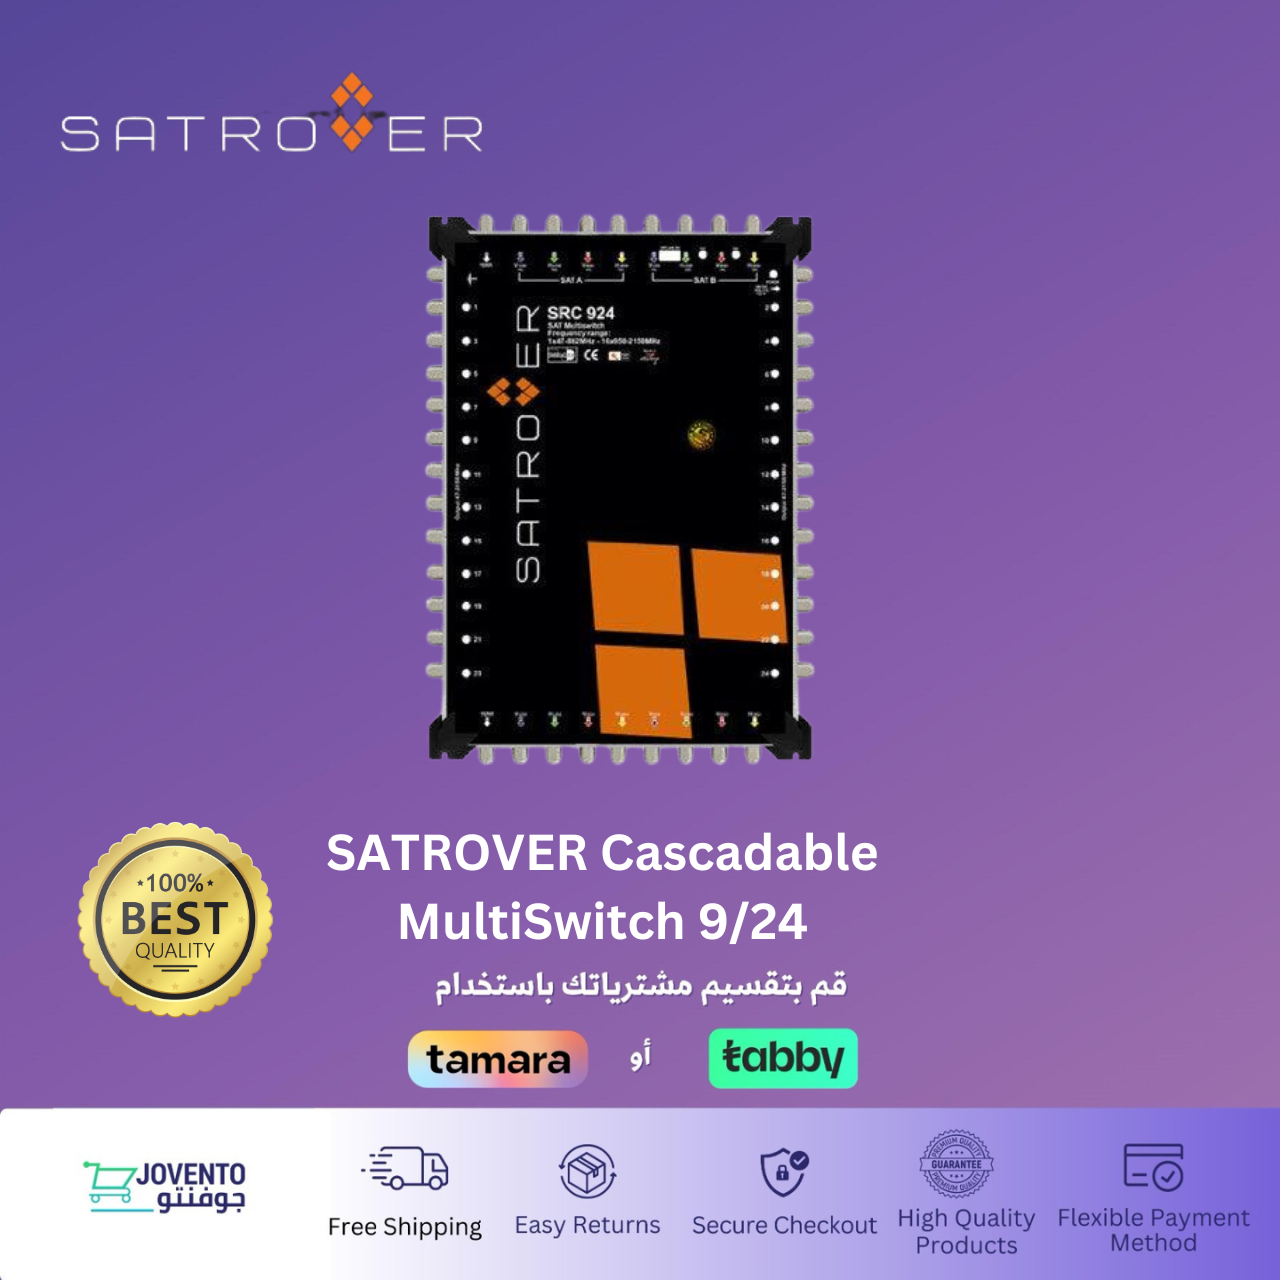 SATROVER Cascadable MultiSwitch 9/24